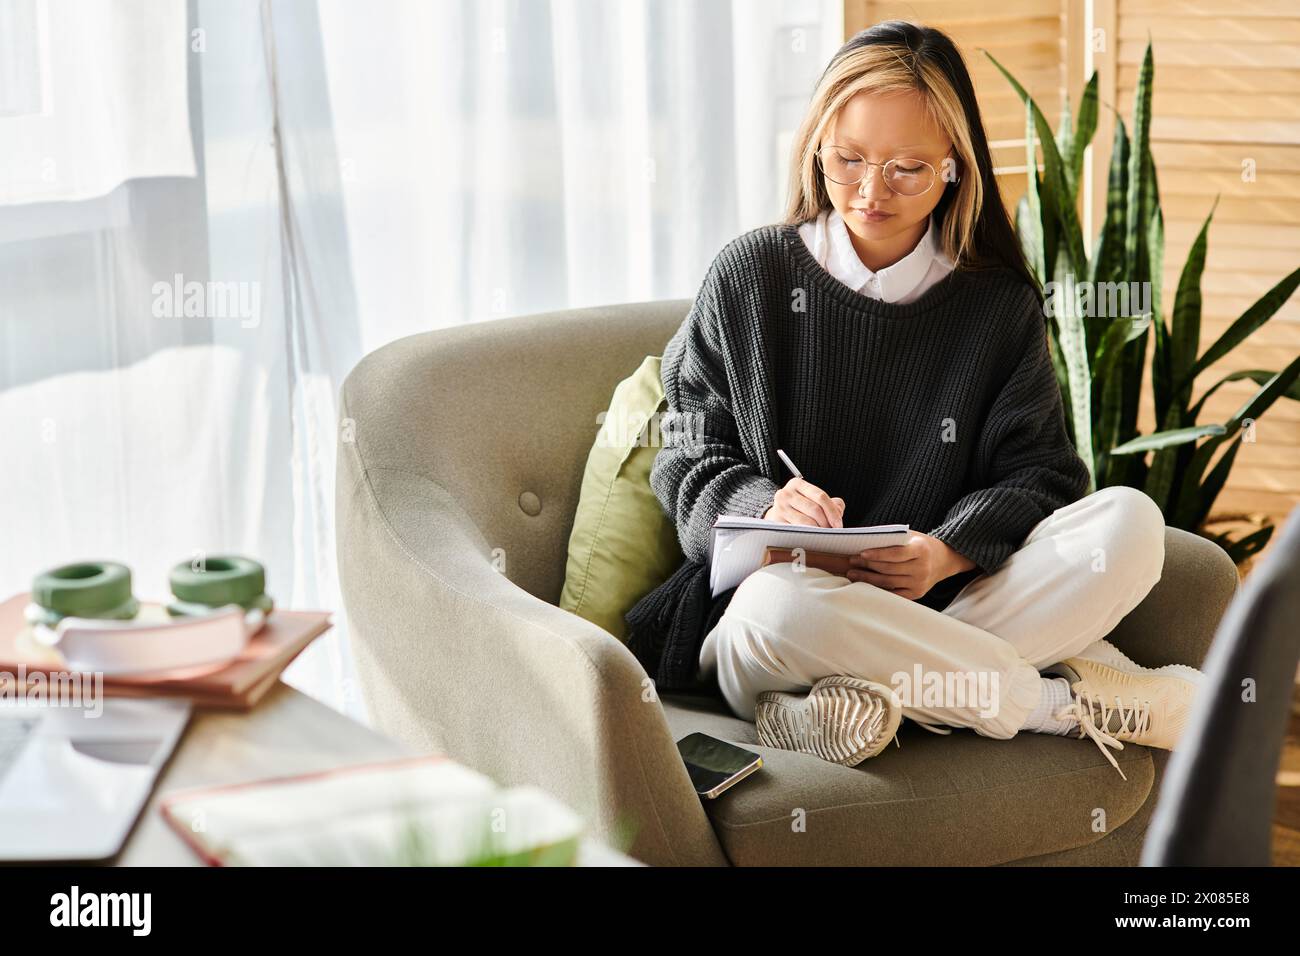 A young Asian woman sits in a chair, engrossed in a book in her lap, embracing the joy of self-education at home. Stock Photo